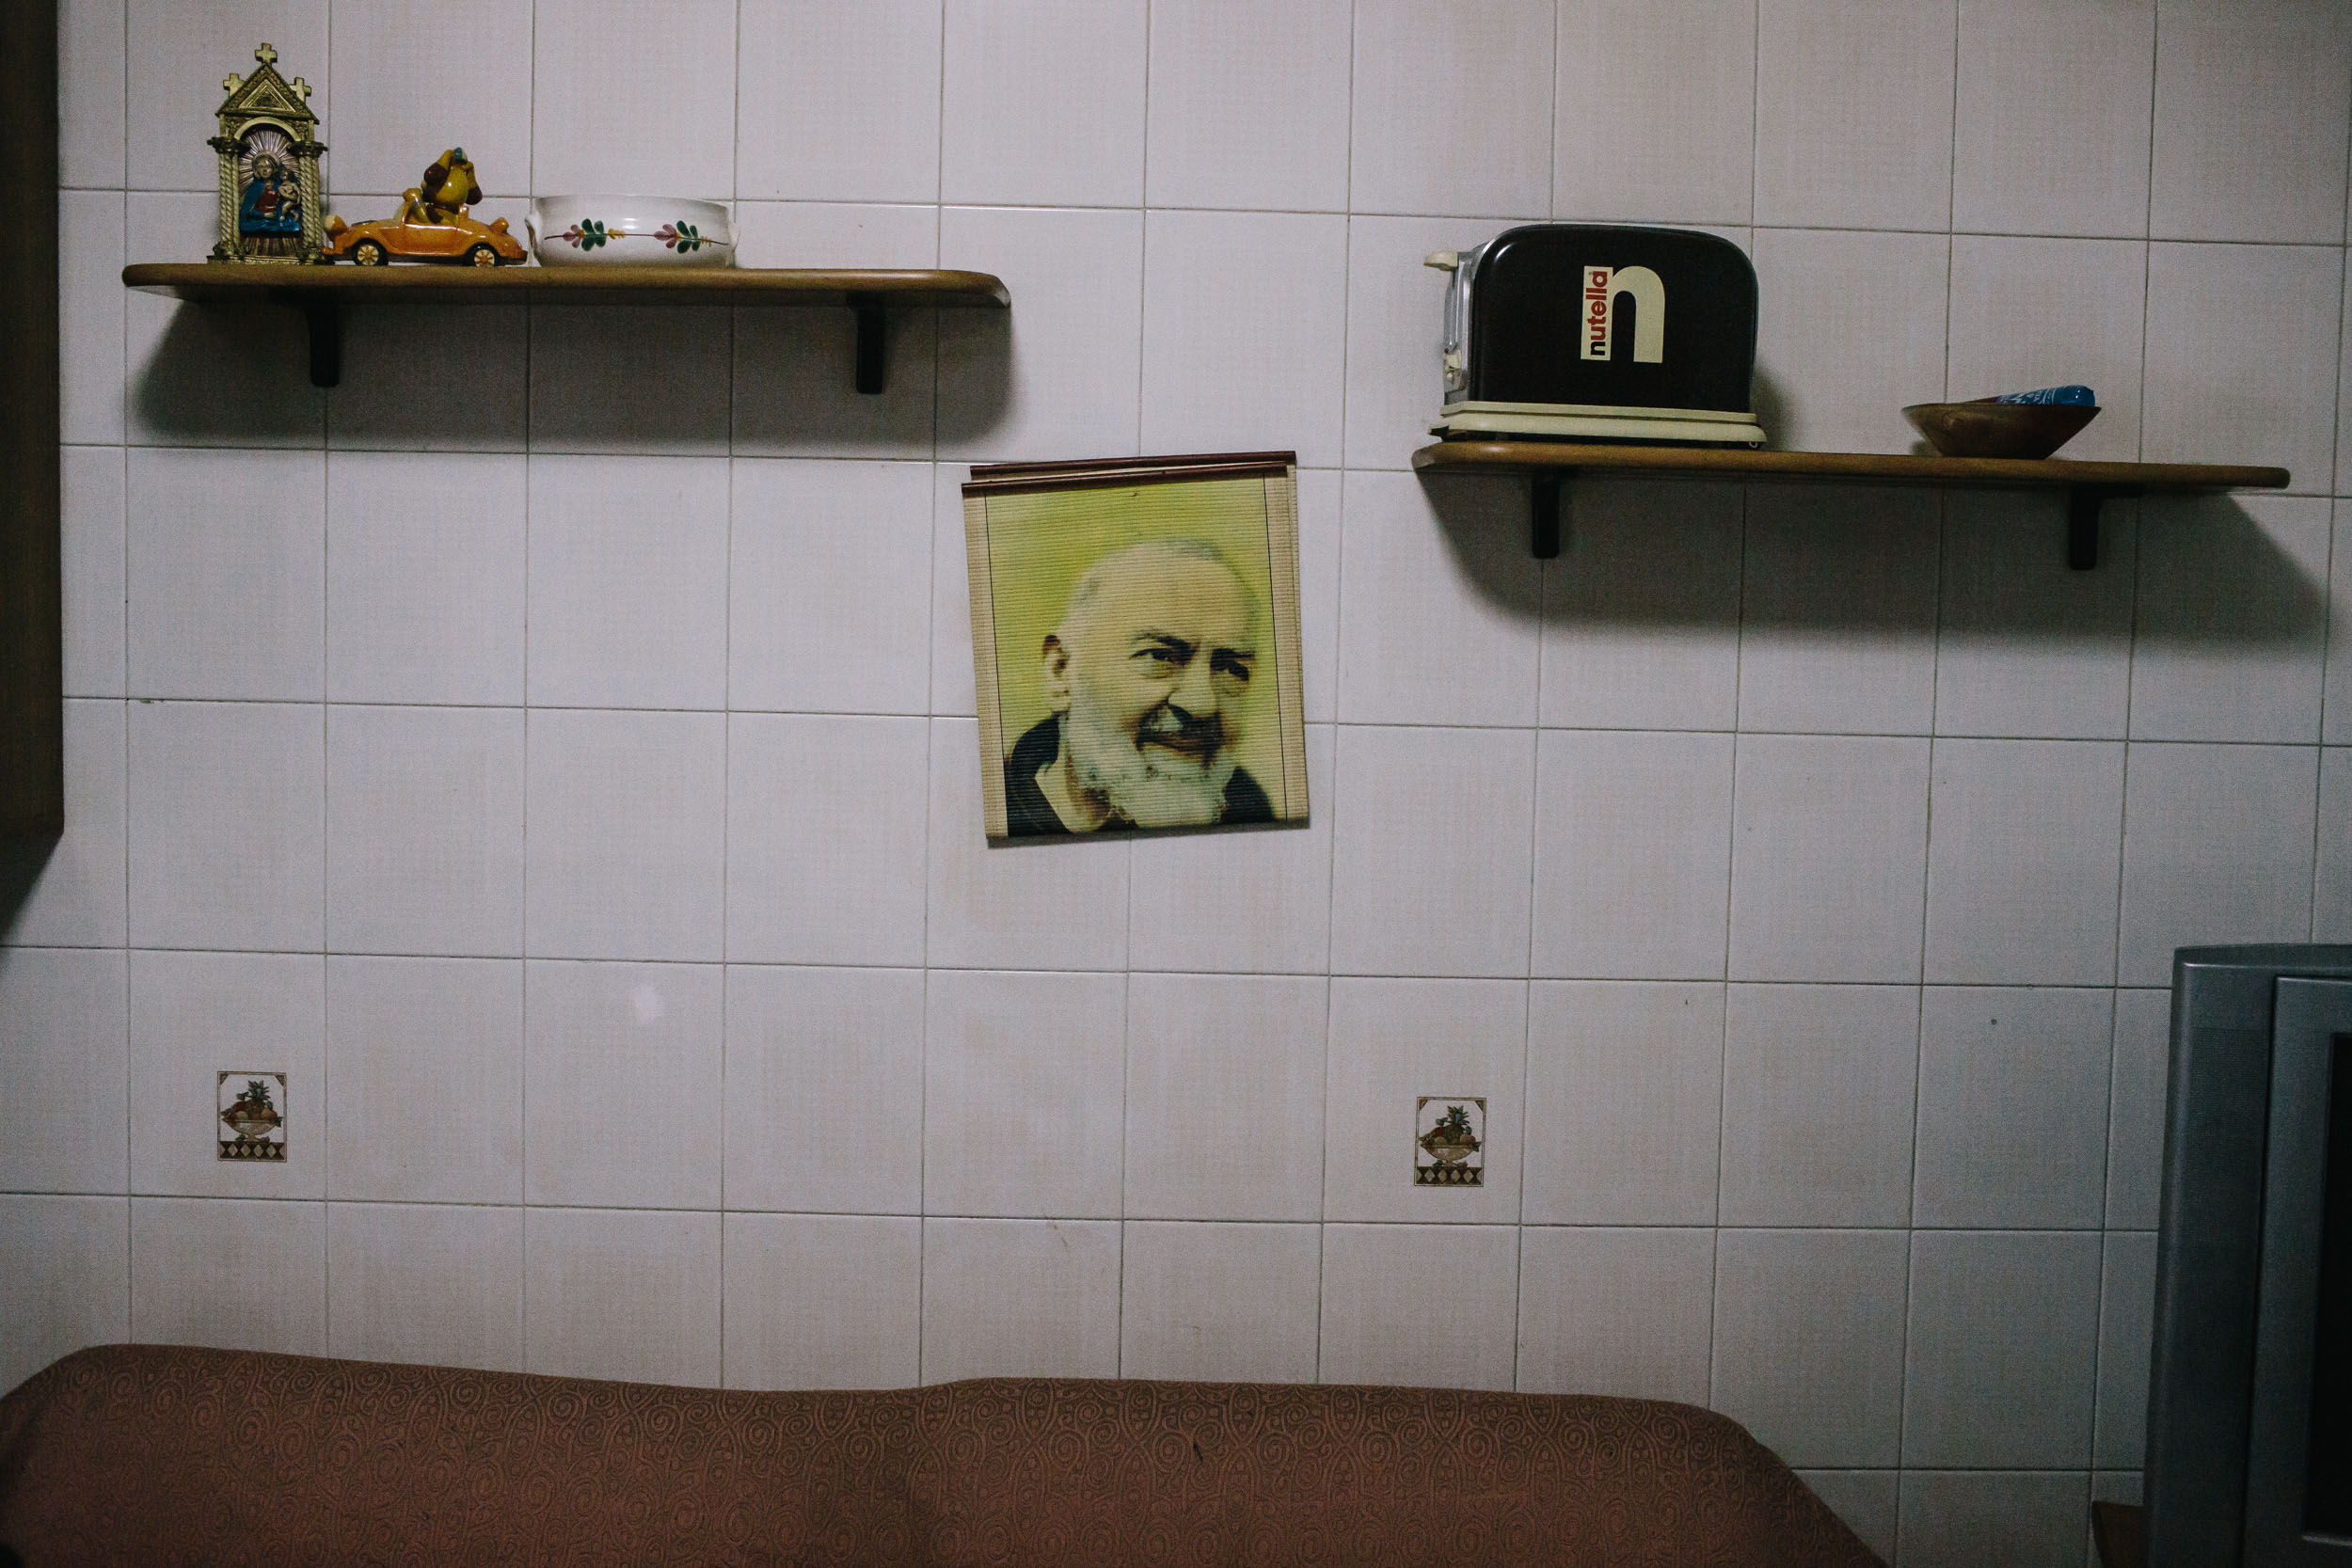 An image of Saint Padre Pio hangs in the kitchen